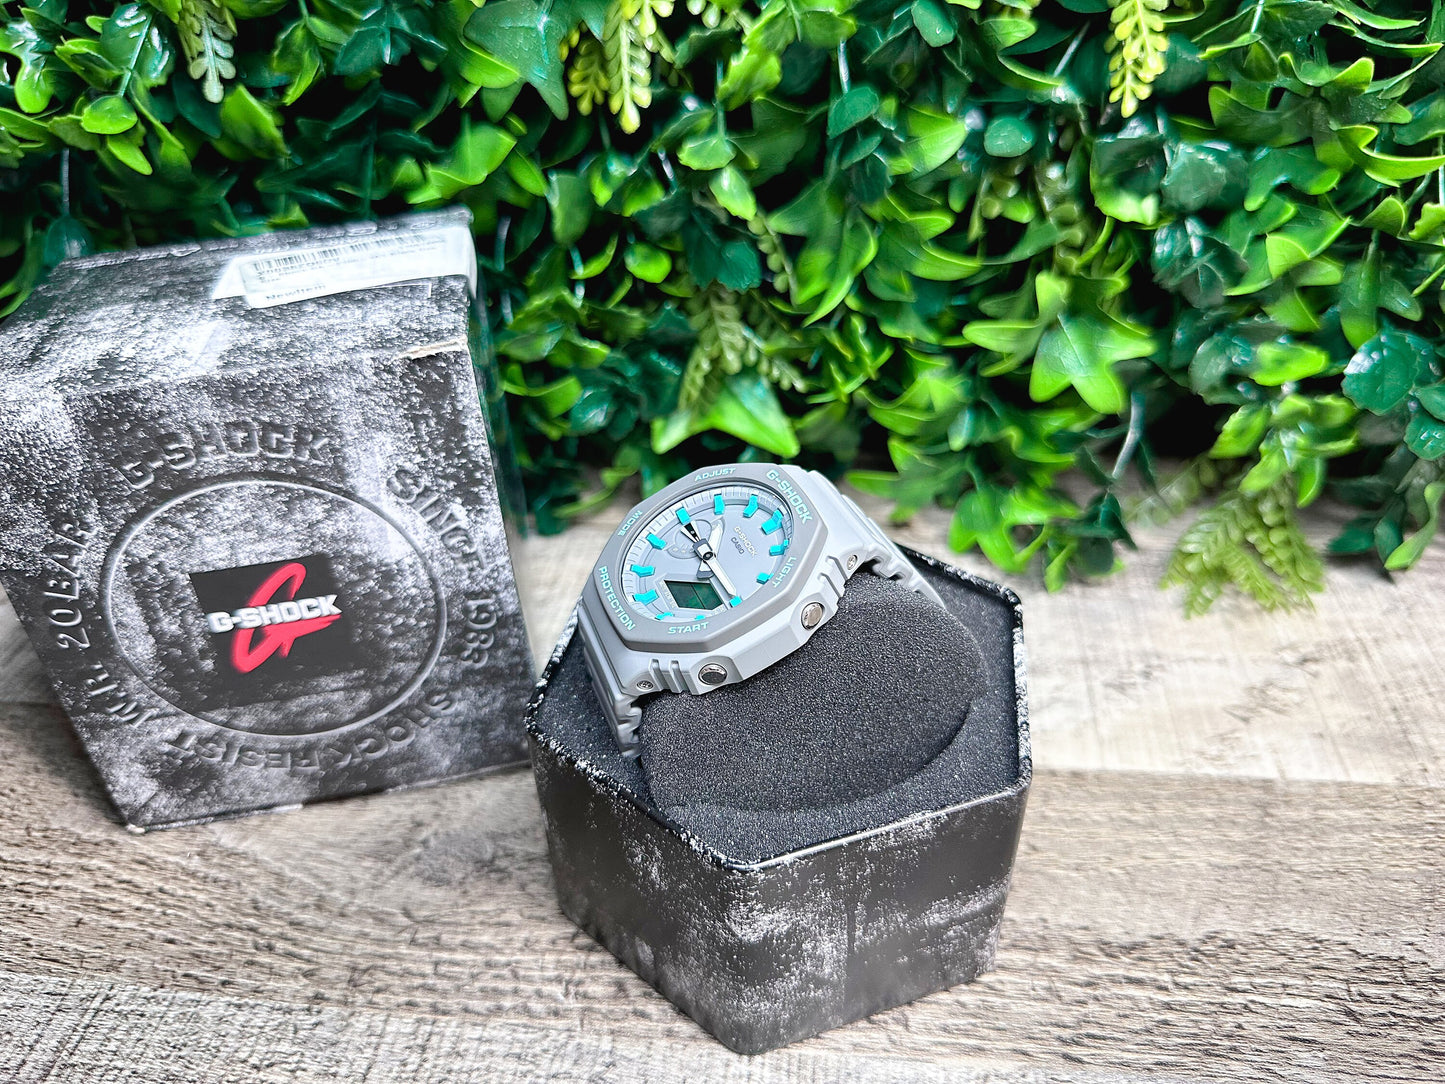 G-Shock CasiOak "Grey Sky" - Grey/Blue Hand Painted Genuine Casio GA2100 - Carbon Core Protection - Optional Sapphire Crystal